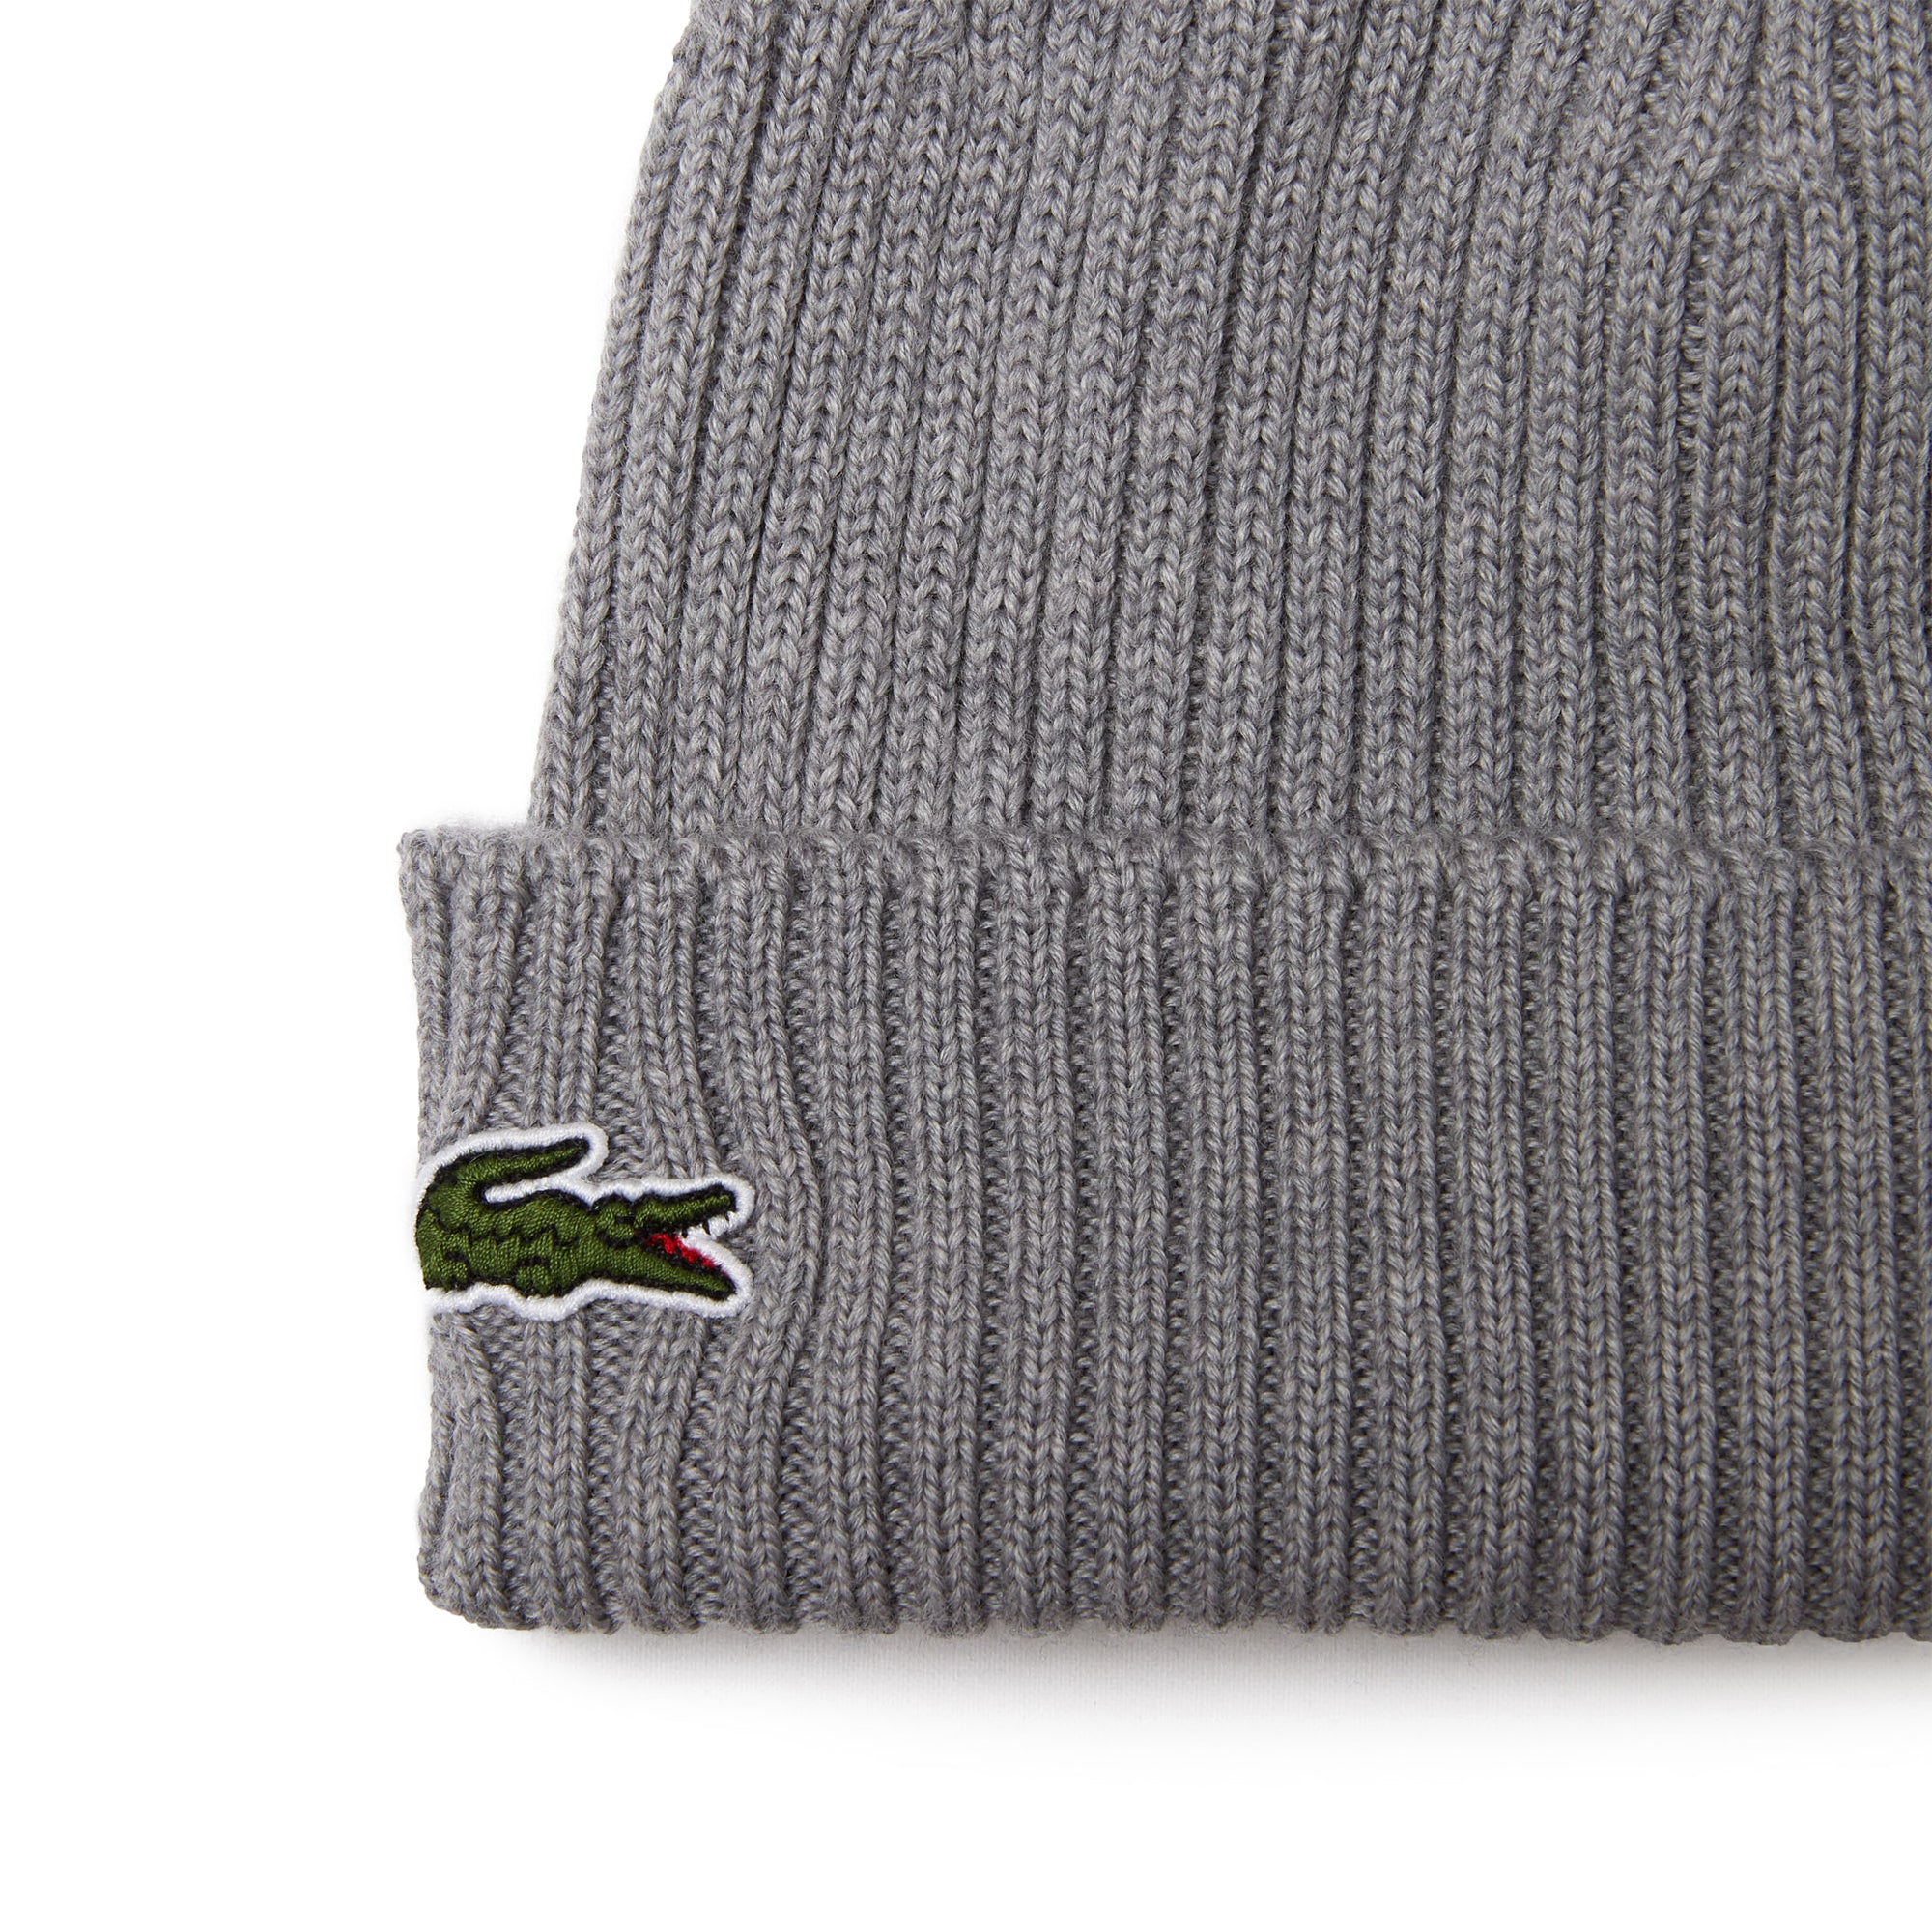 lacoste-ribbed-wool-beanie-hat-rb0001-grey-chine-yrd